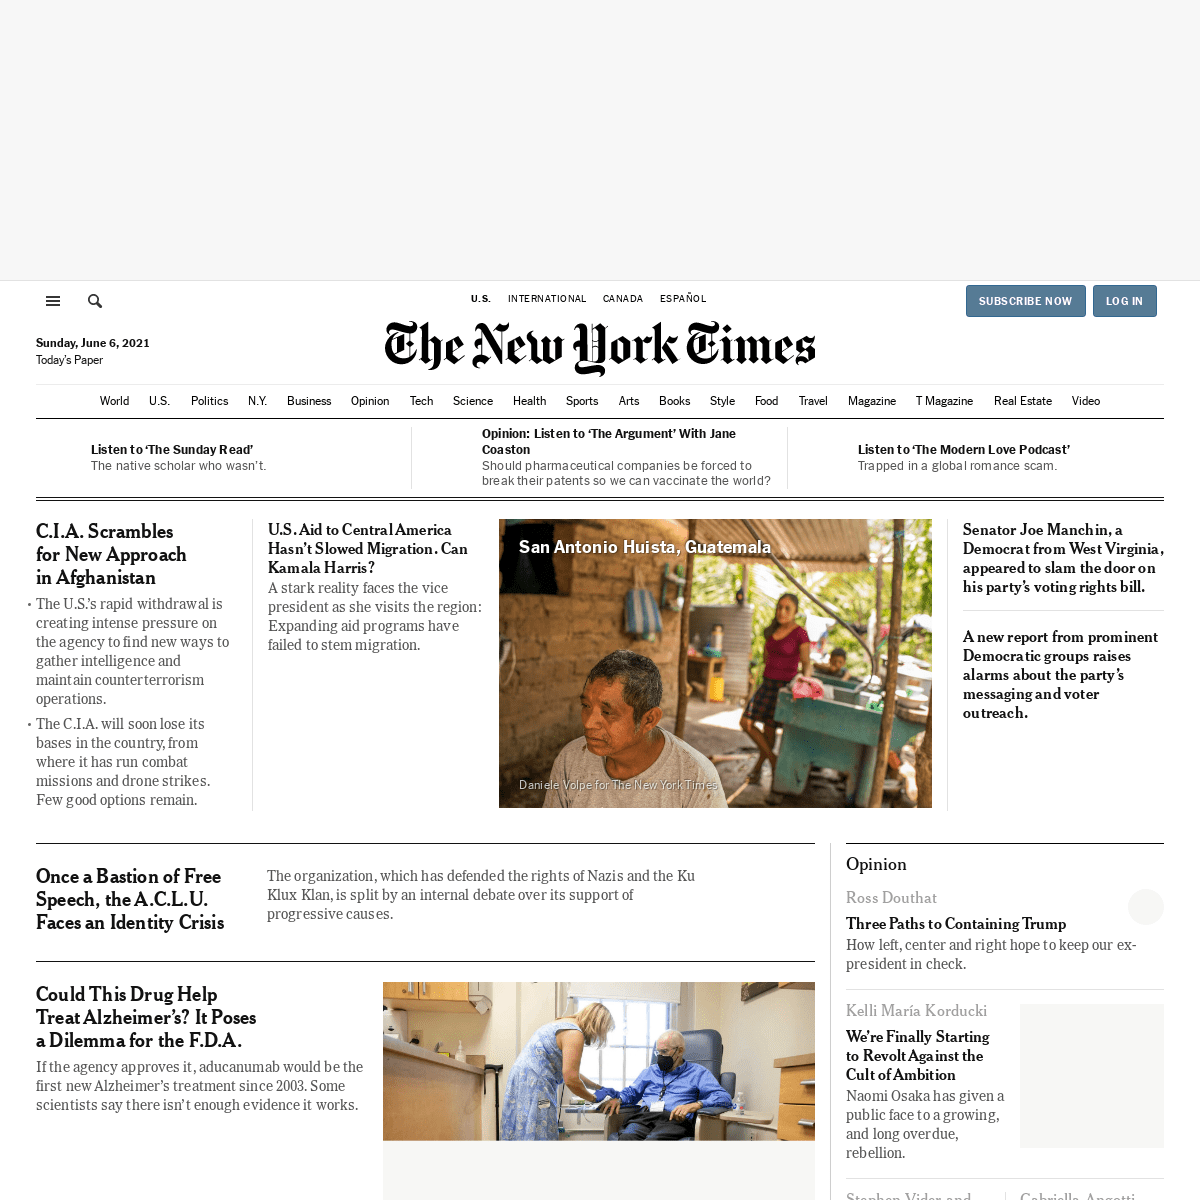 A complete backup of https://nyt.net